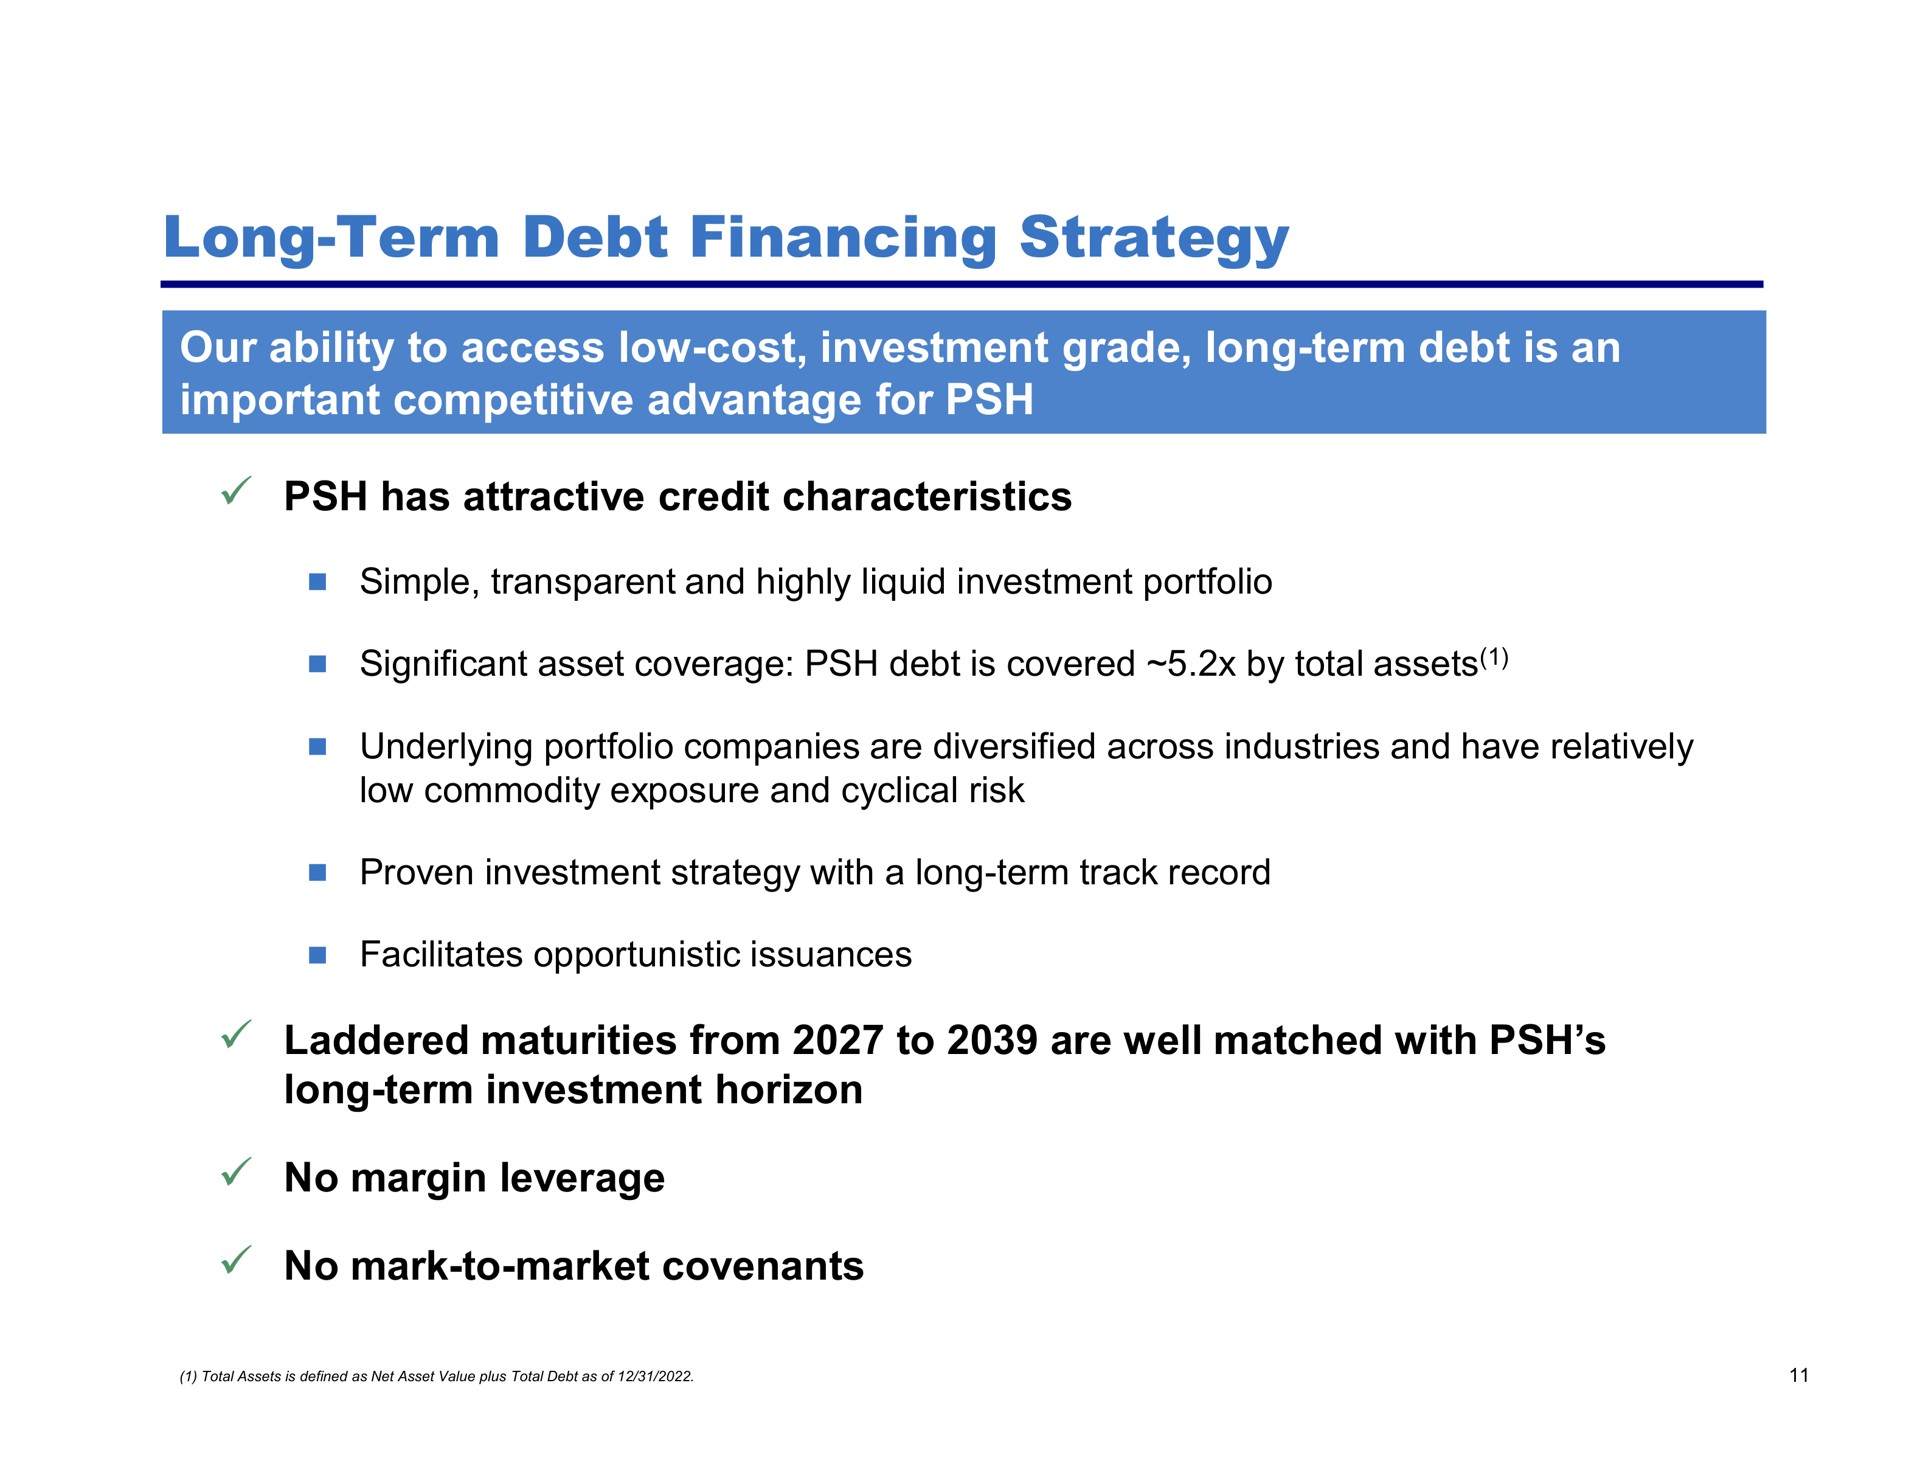 long term debt financing strategy our ability to access low cost investment grade long term debt is an important competitive advantage for has attractive credit characteristics laddered maturities from to are well matched with long term investment horizon no margin leverage no mark to market covenants significant asset coverage covered by total assets | Pershing Square